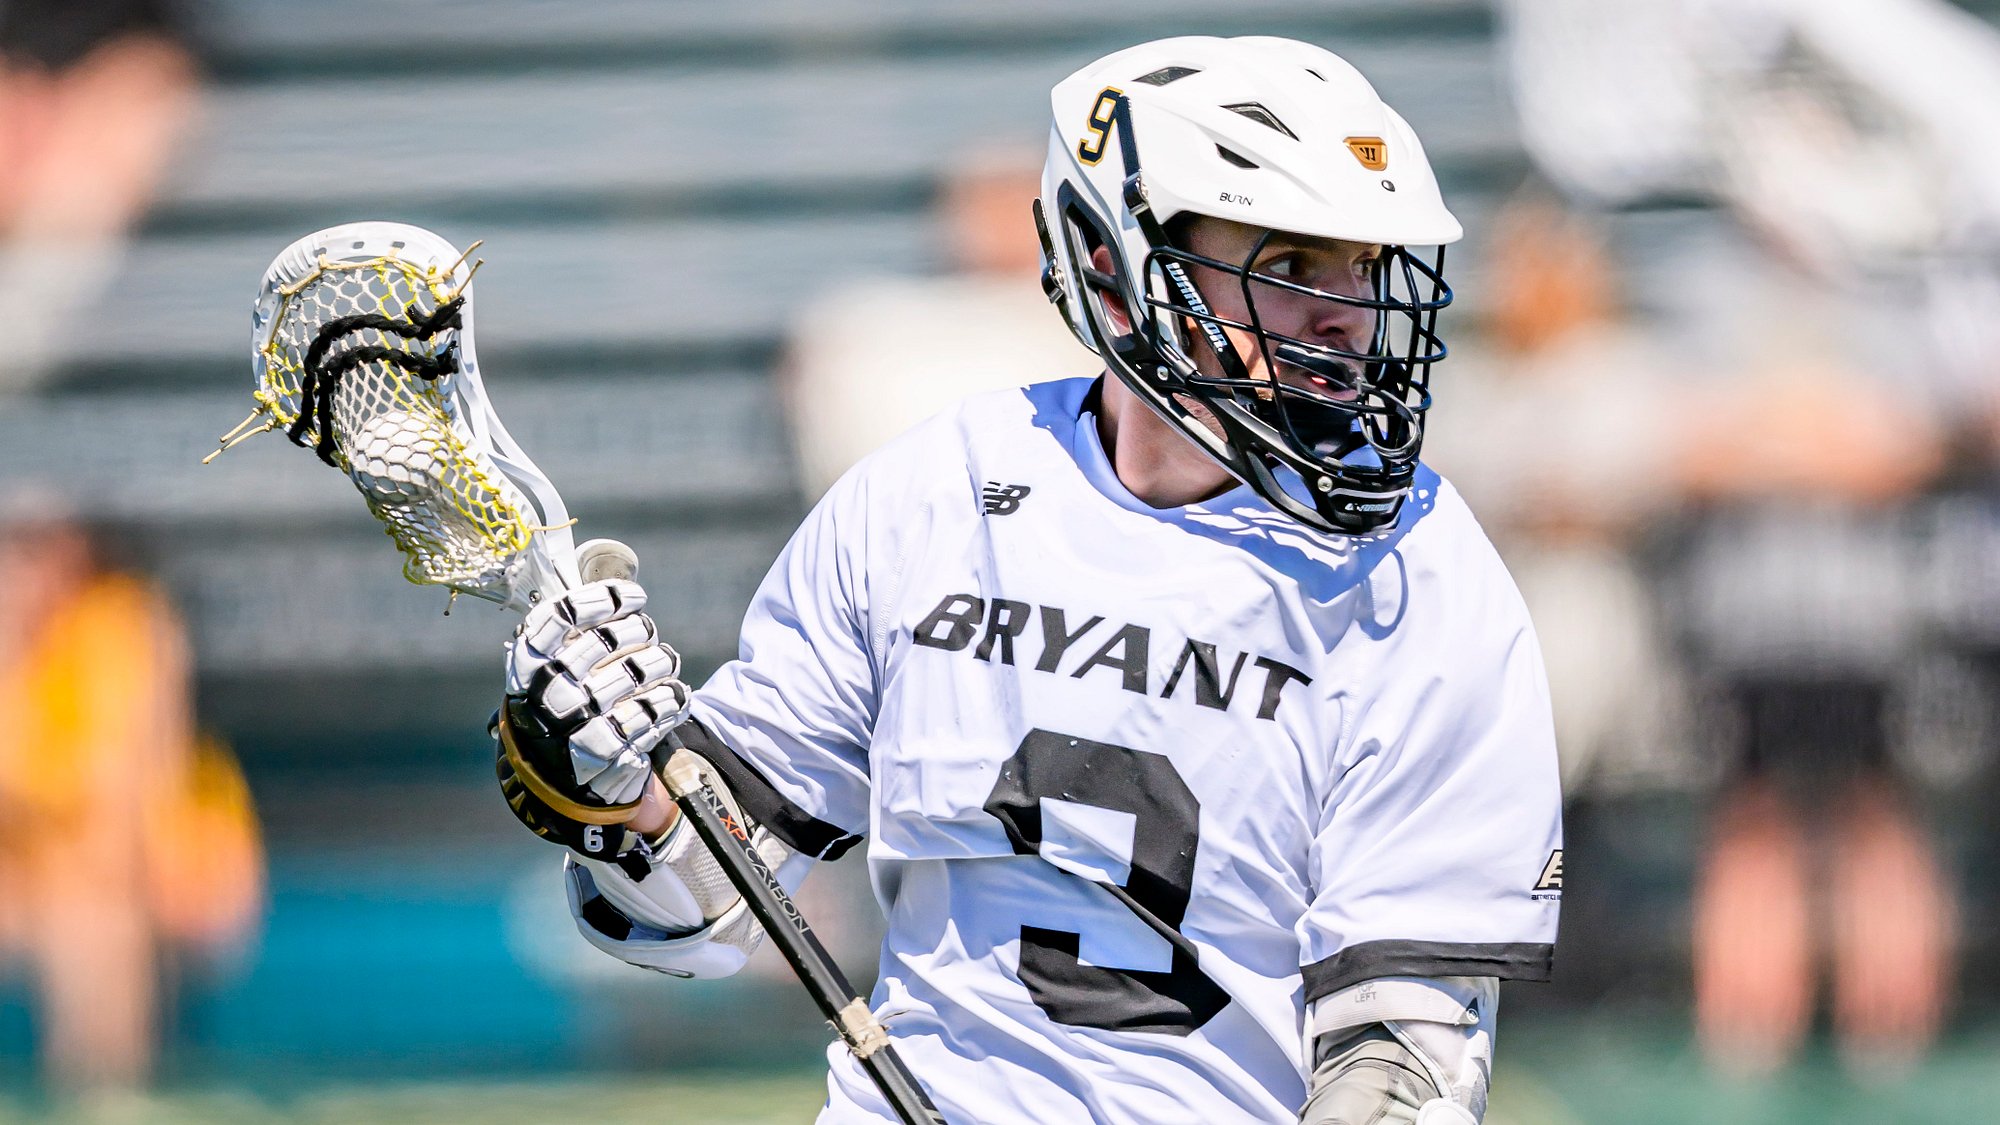 Bryant faces Johns Hopkins Sunday in NCAA First Round